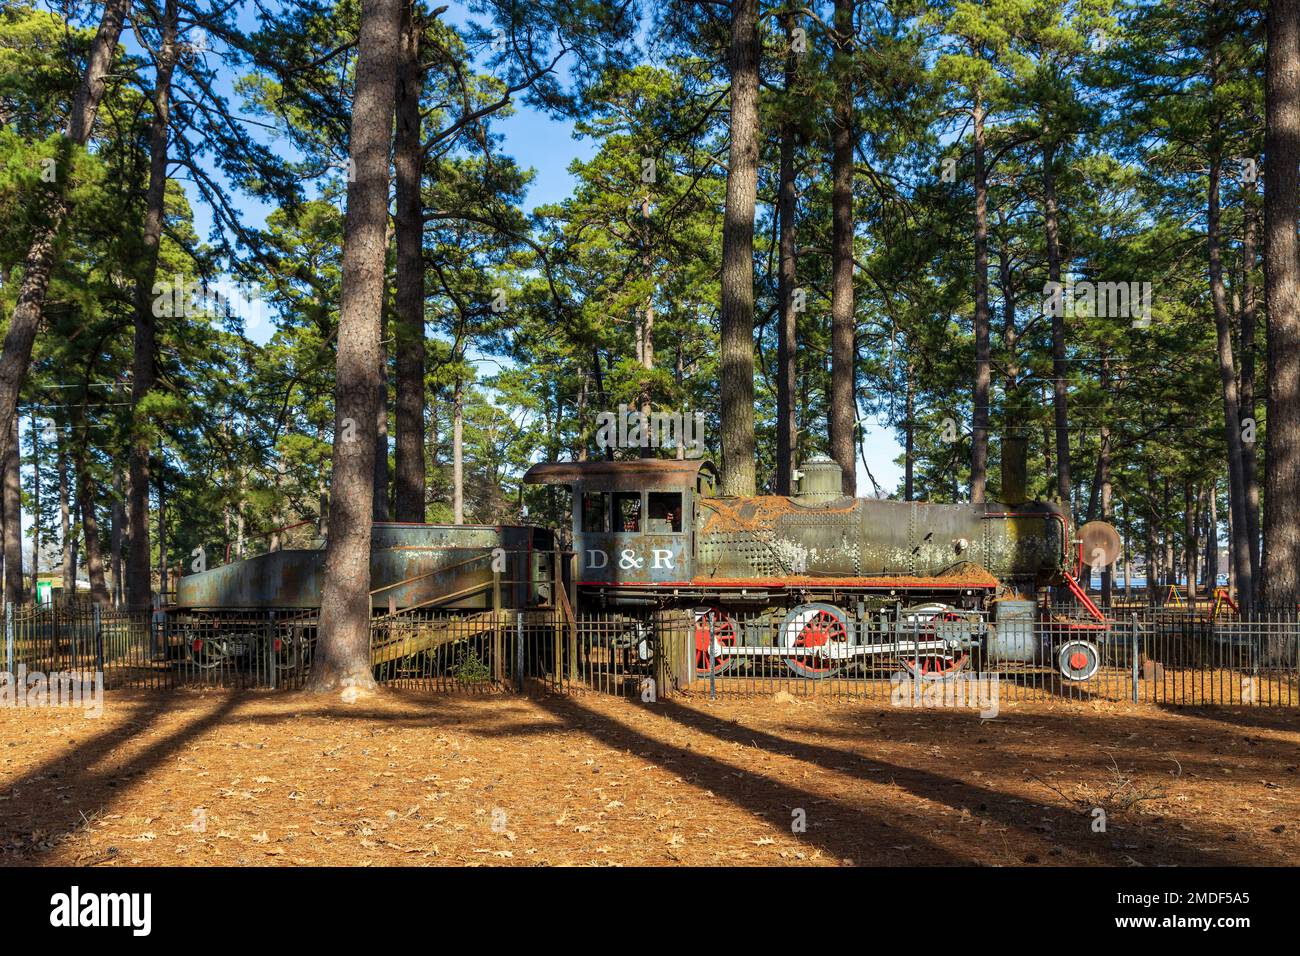 Beautiful Ford Park in Shreveport, Louisiana, with an old historic locomotive on display Stock Photo